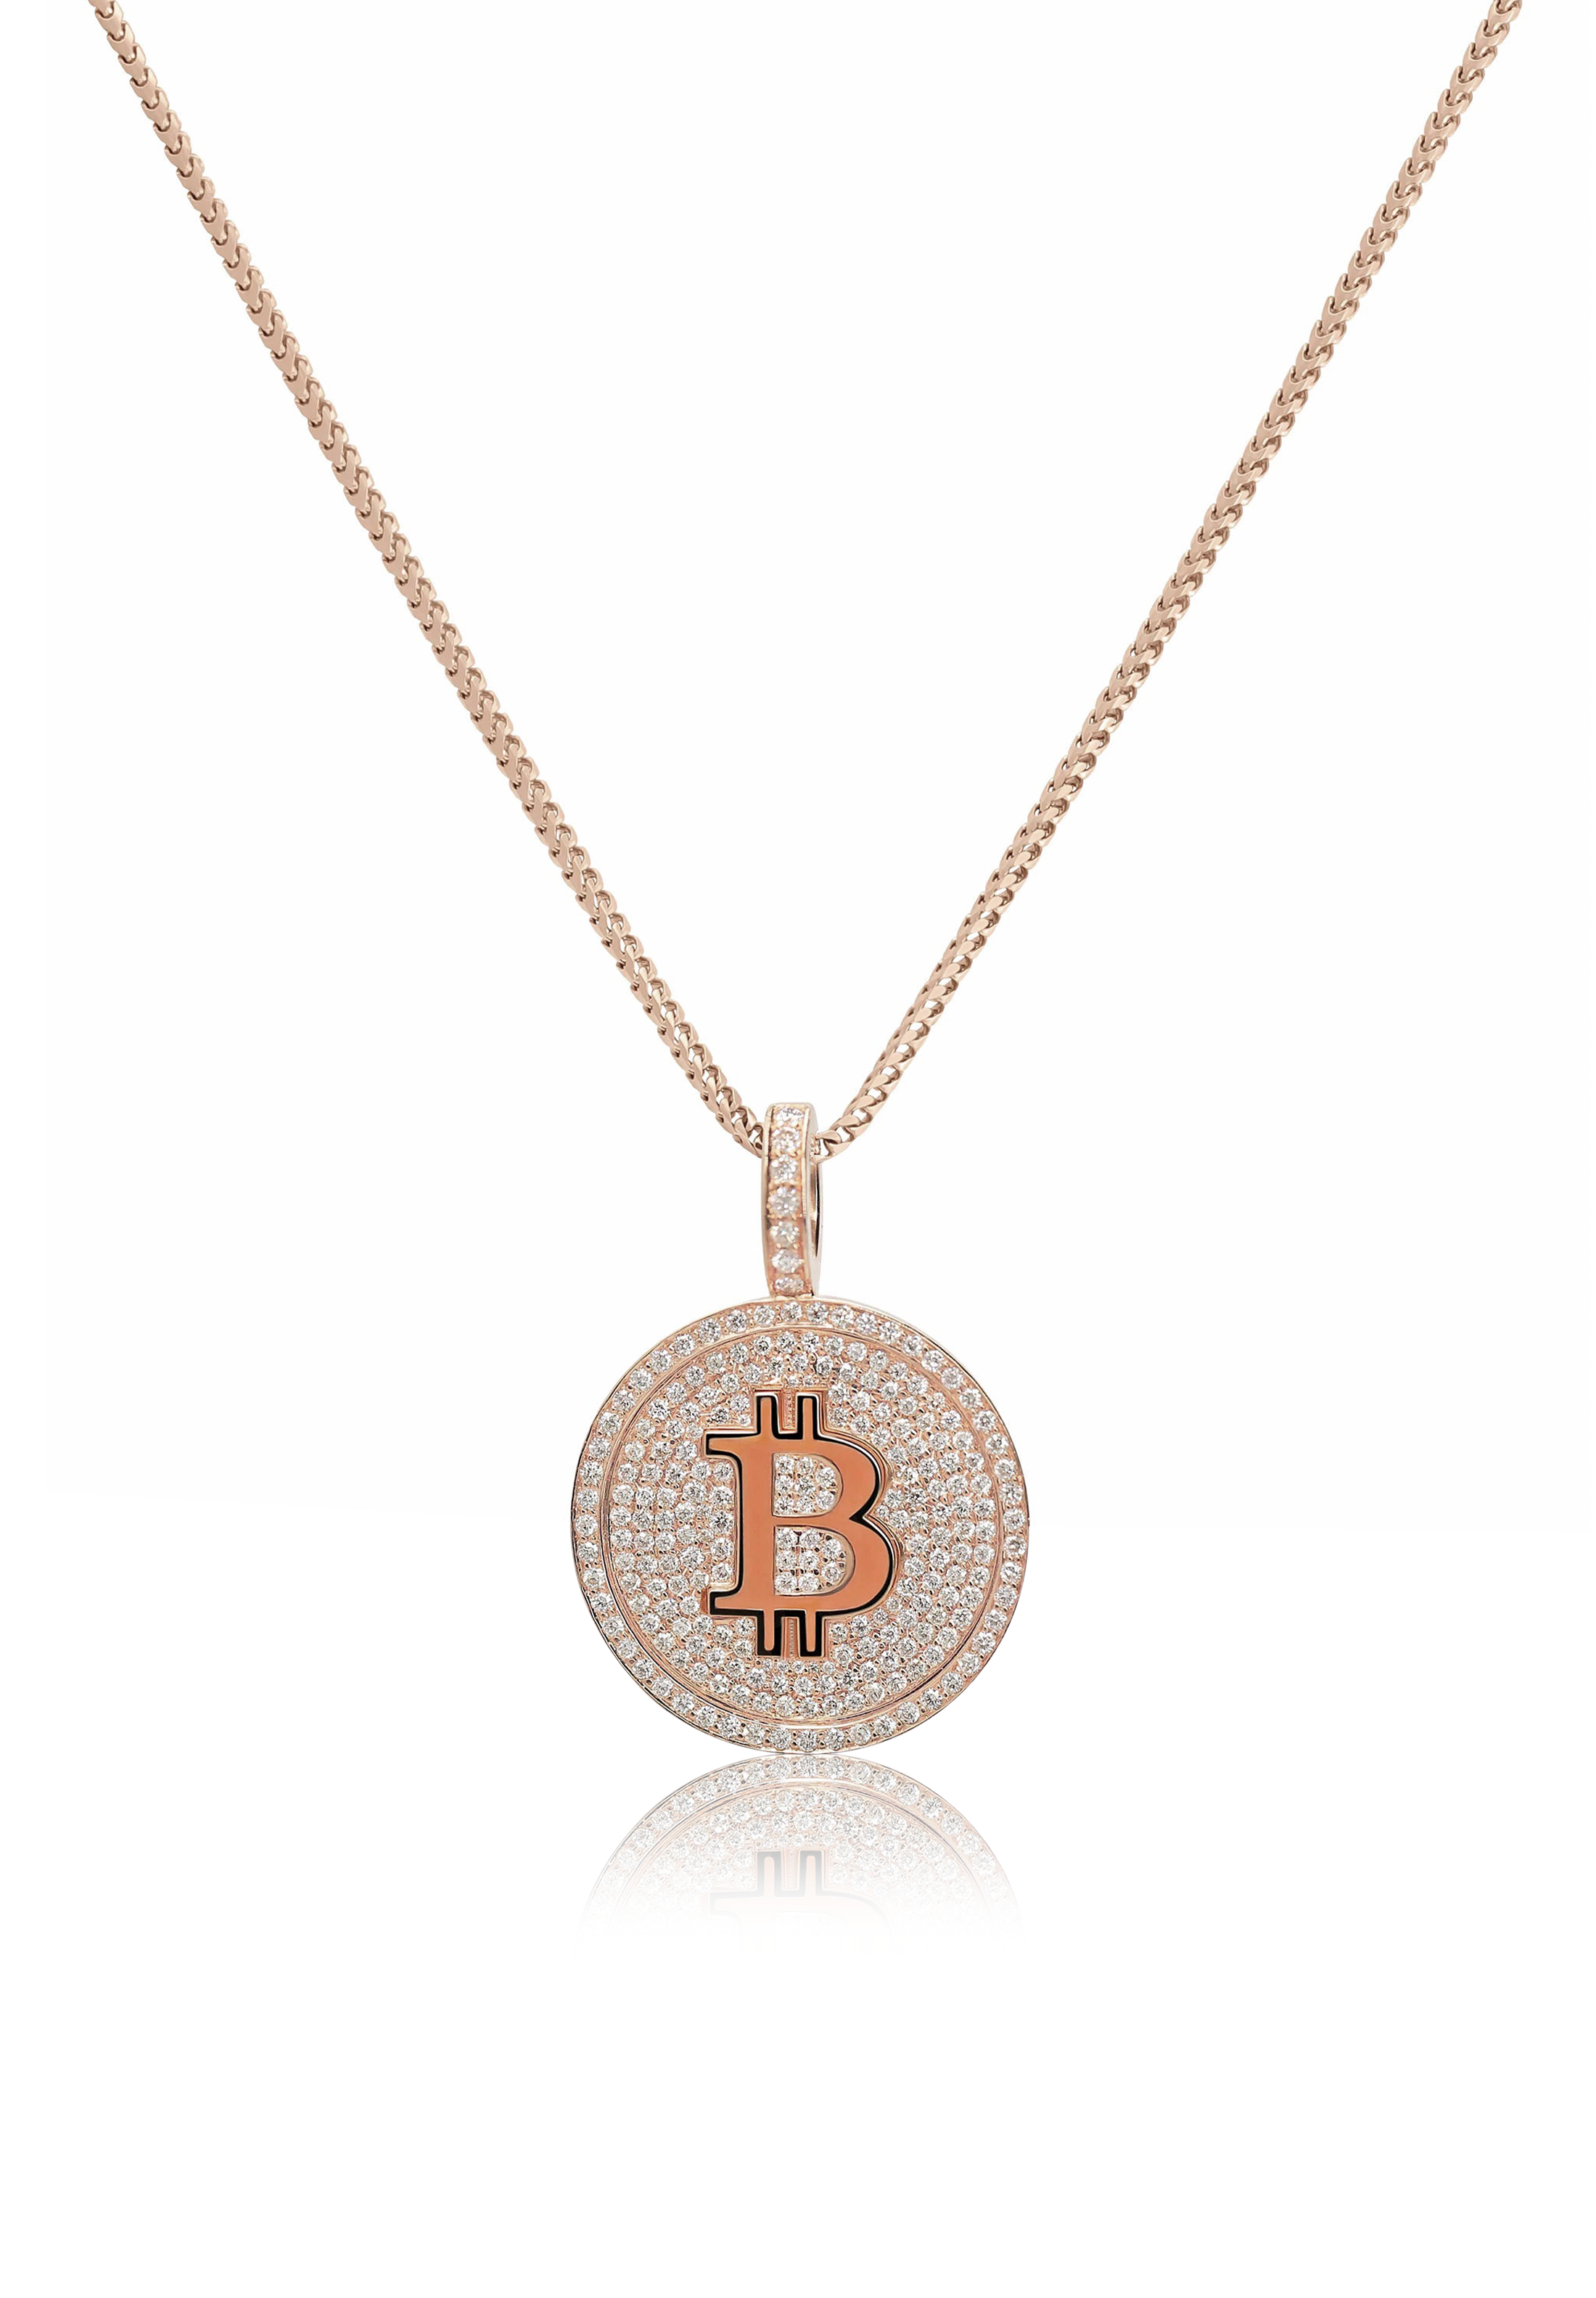 Bitcoin Piece Pendant Fully Iced Out - Fenom & Co.